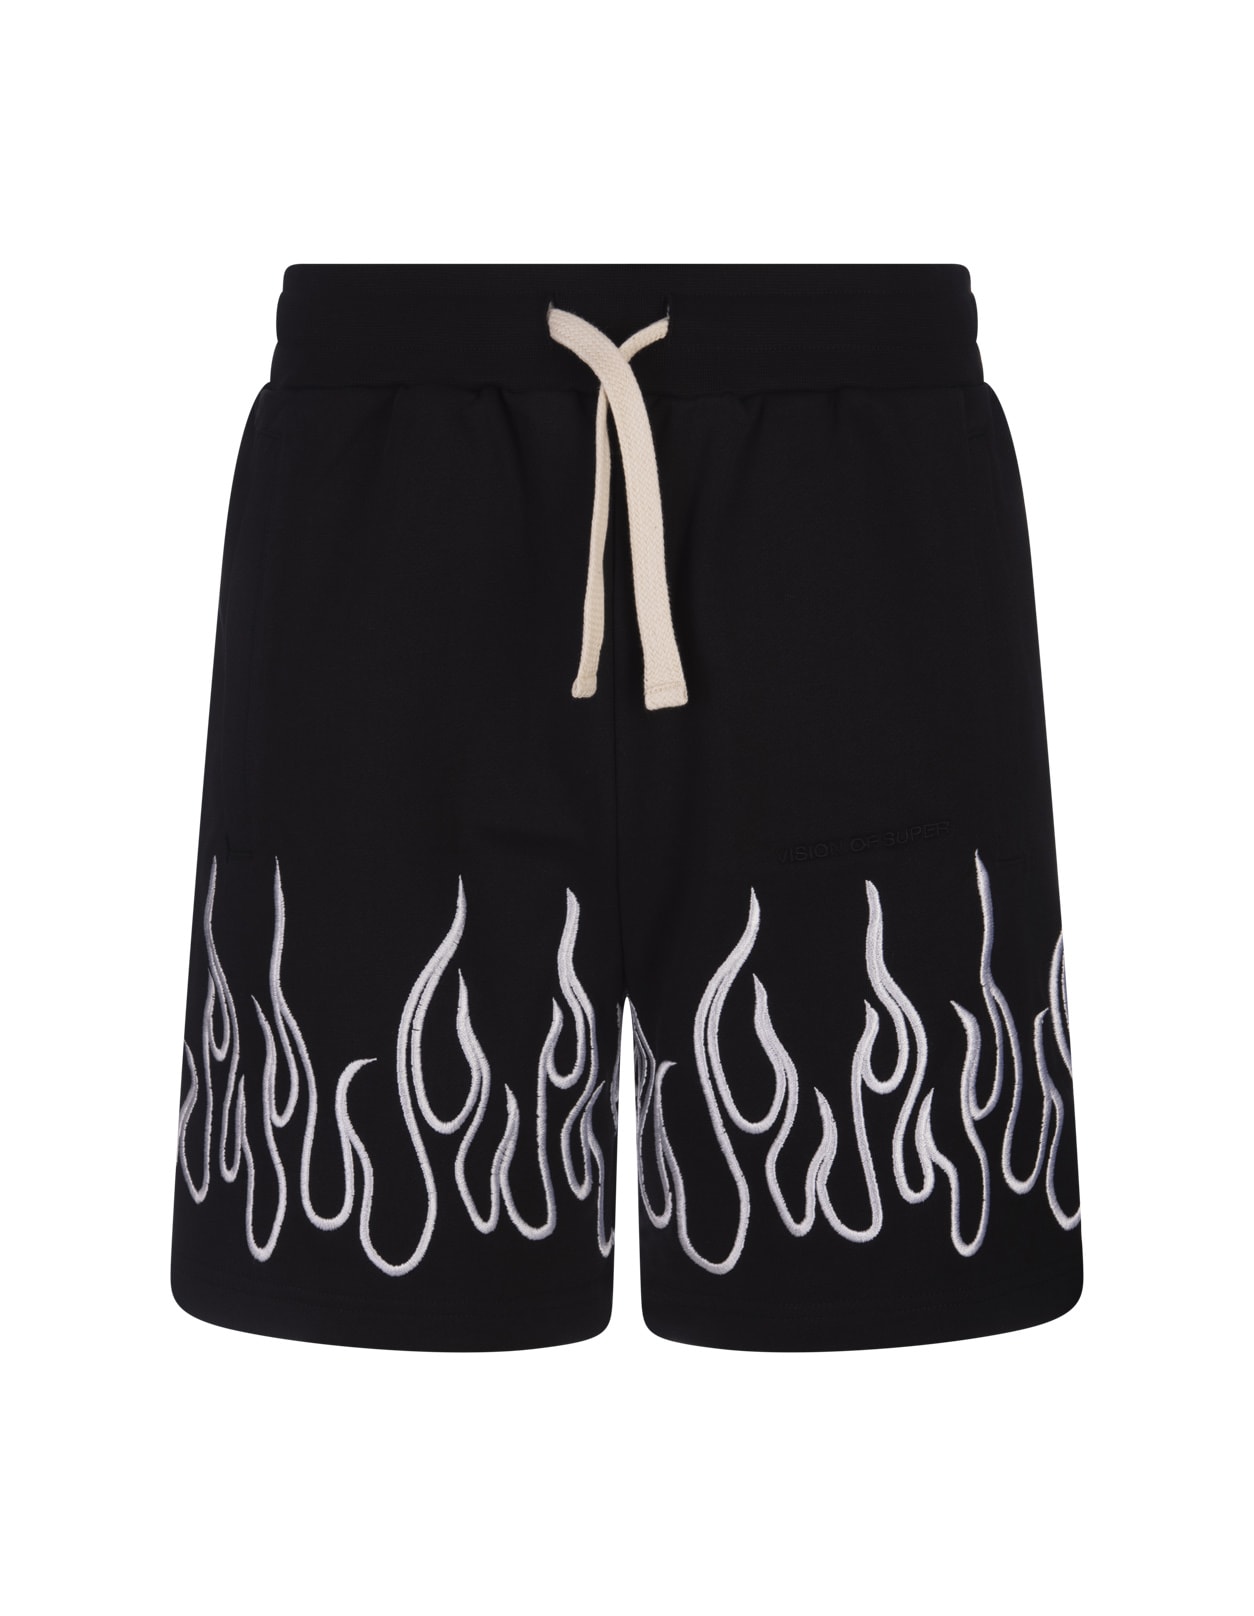 Black Shorts With Embroidered White Flames